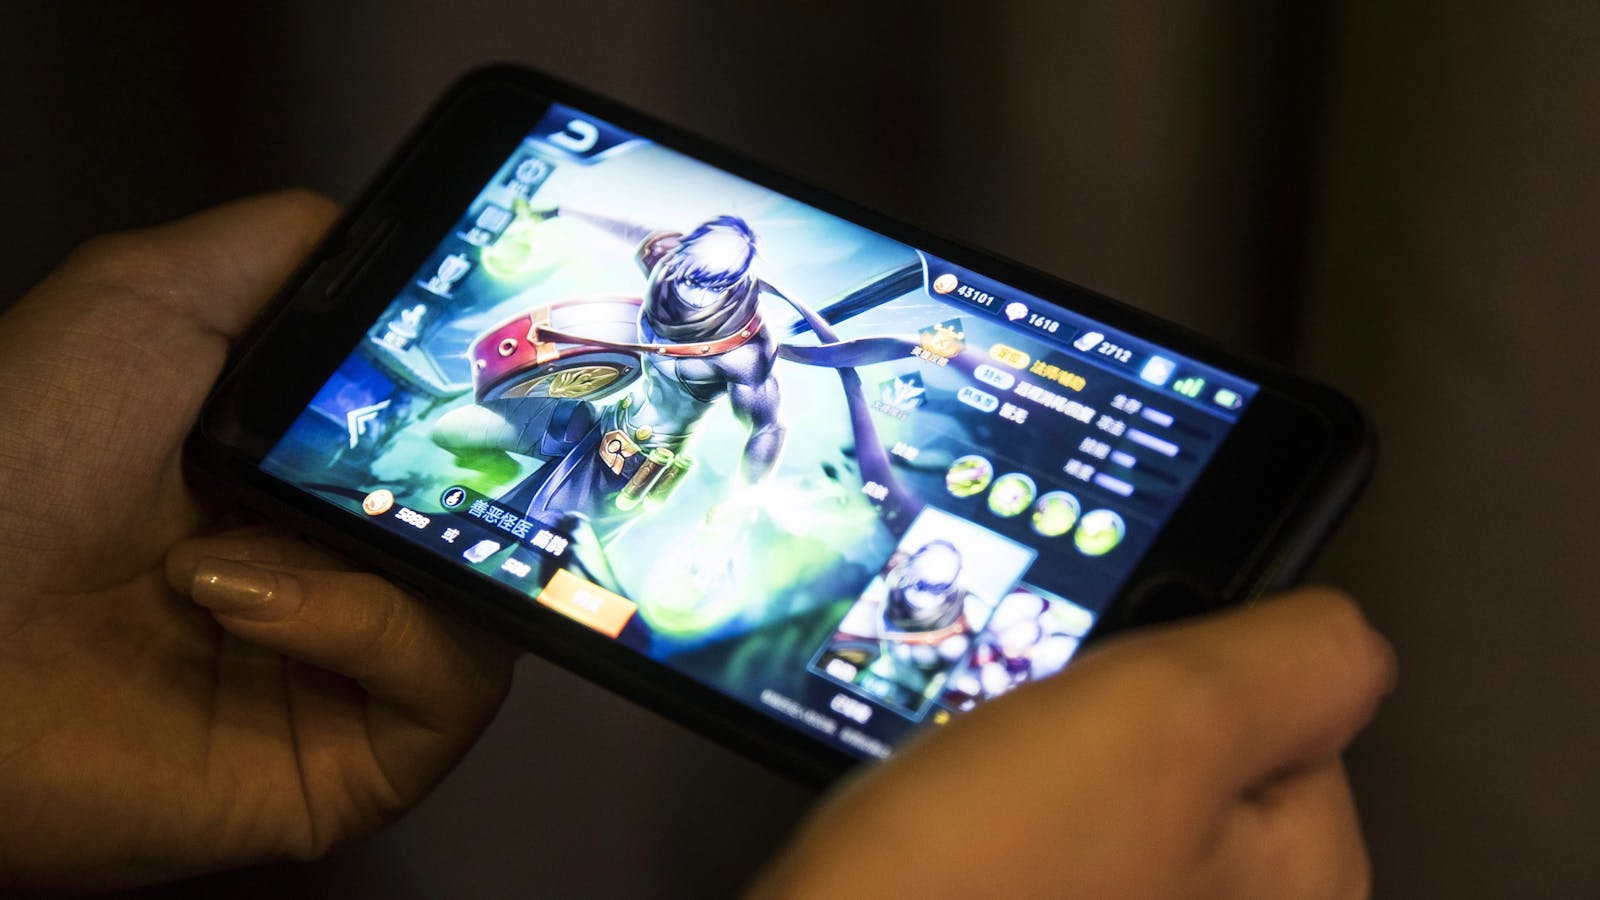 Tencent's Honor of Kings mobile game on an iPhone in Hong Kong last year. Photo by Bloomberg